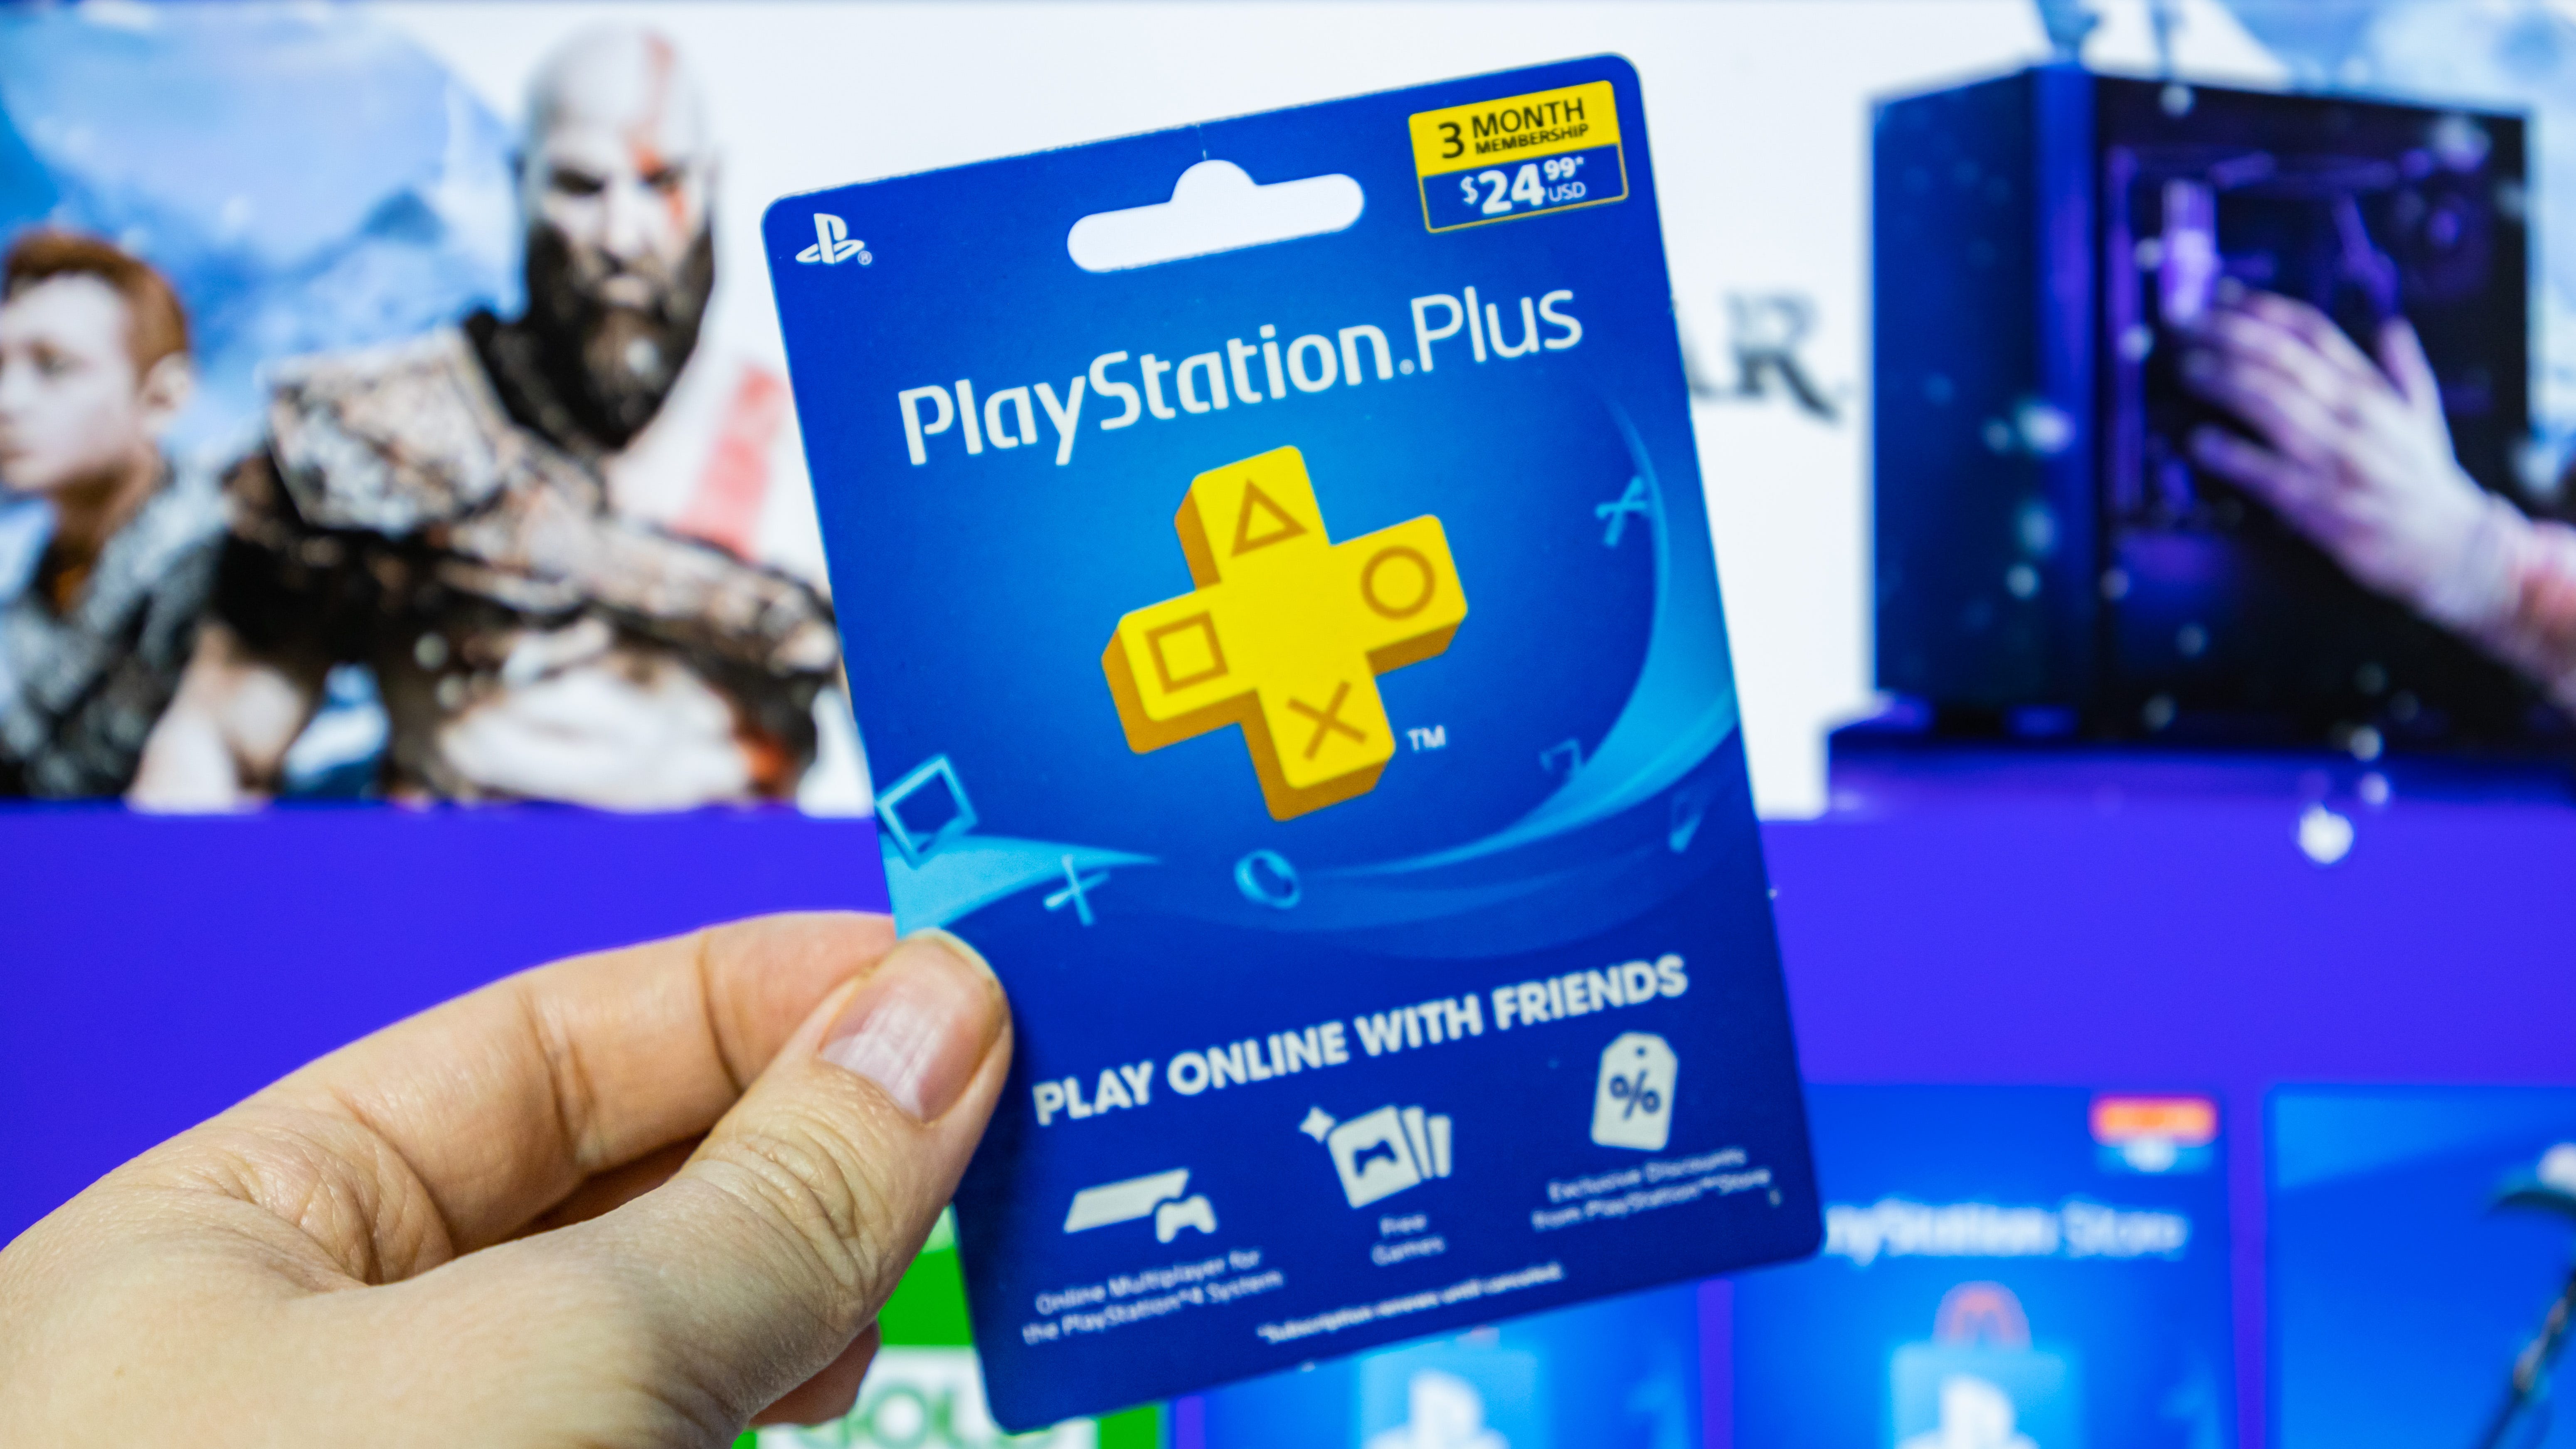 Ask PlayStation on X: With PlayStation Plus, you can find right